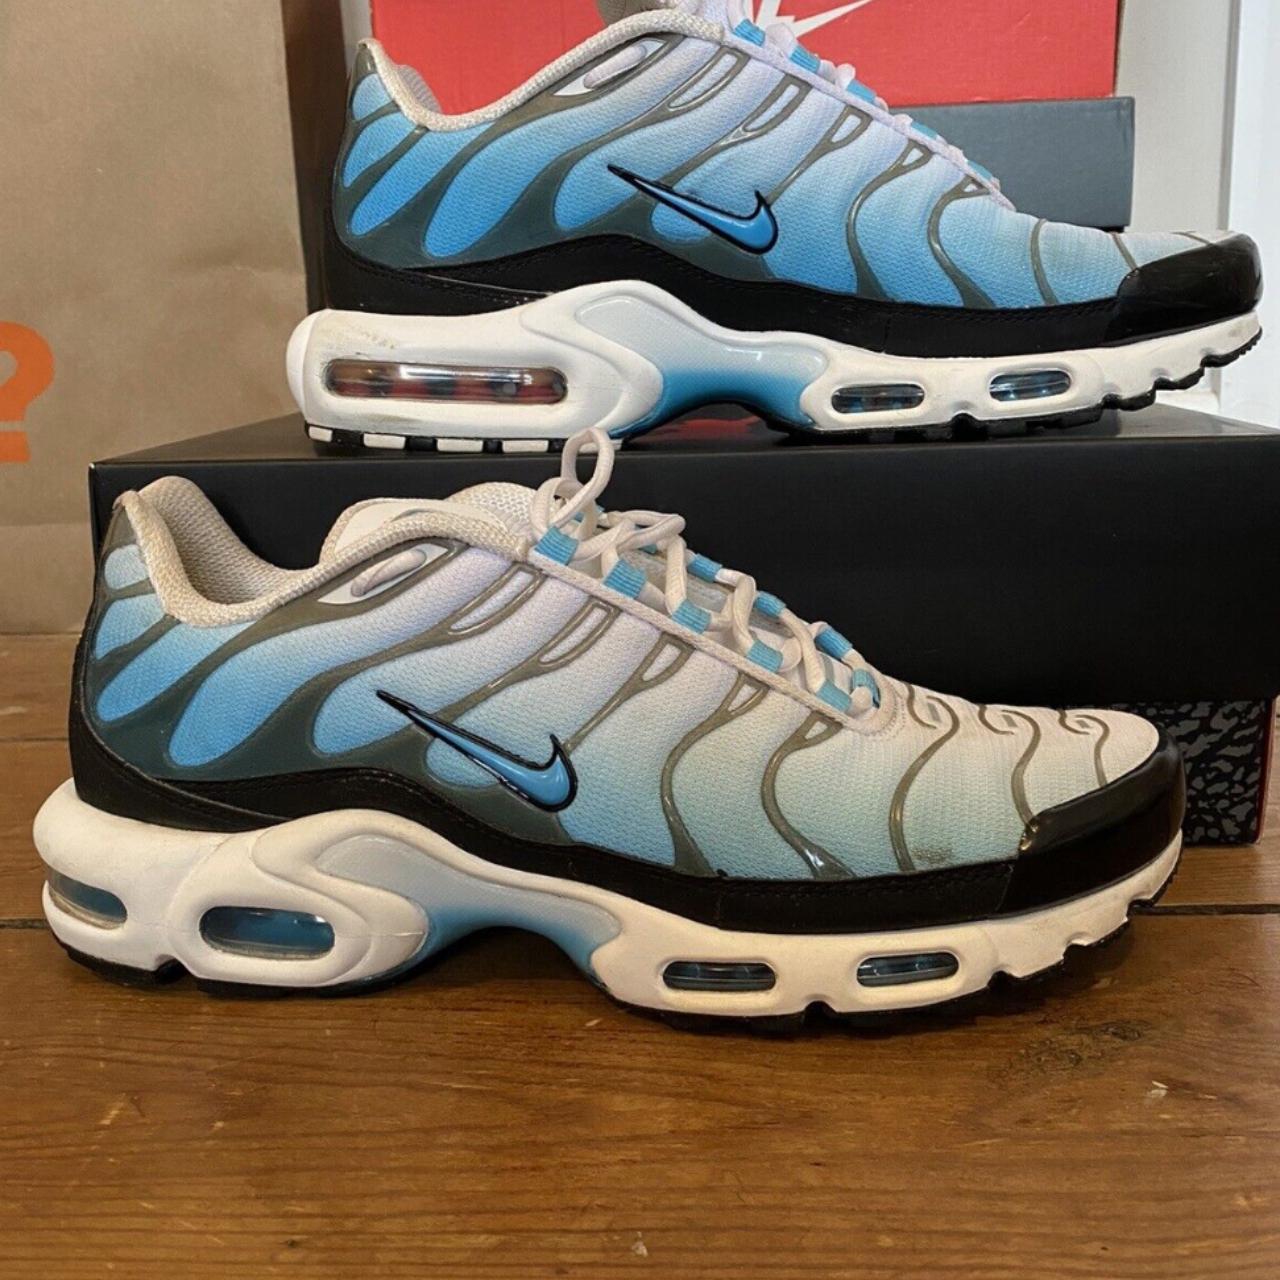 Nike tn Baltic blue used in good condition size 9 - Depop